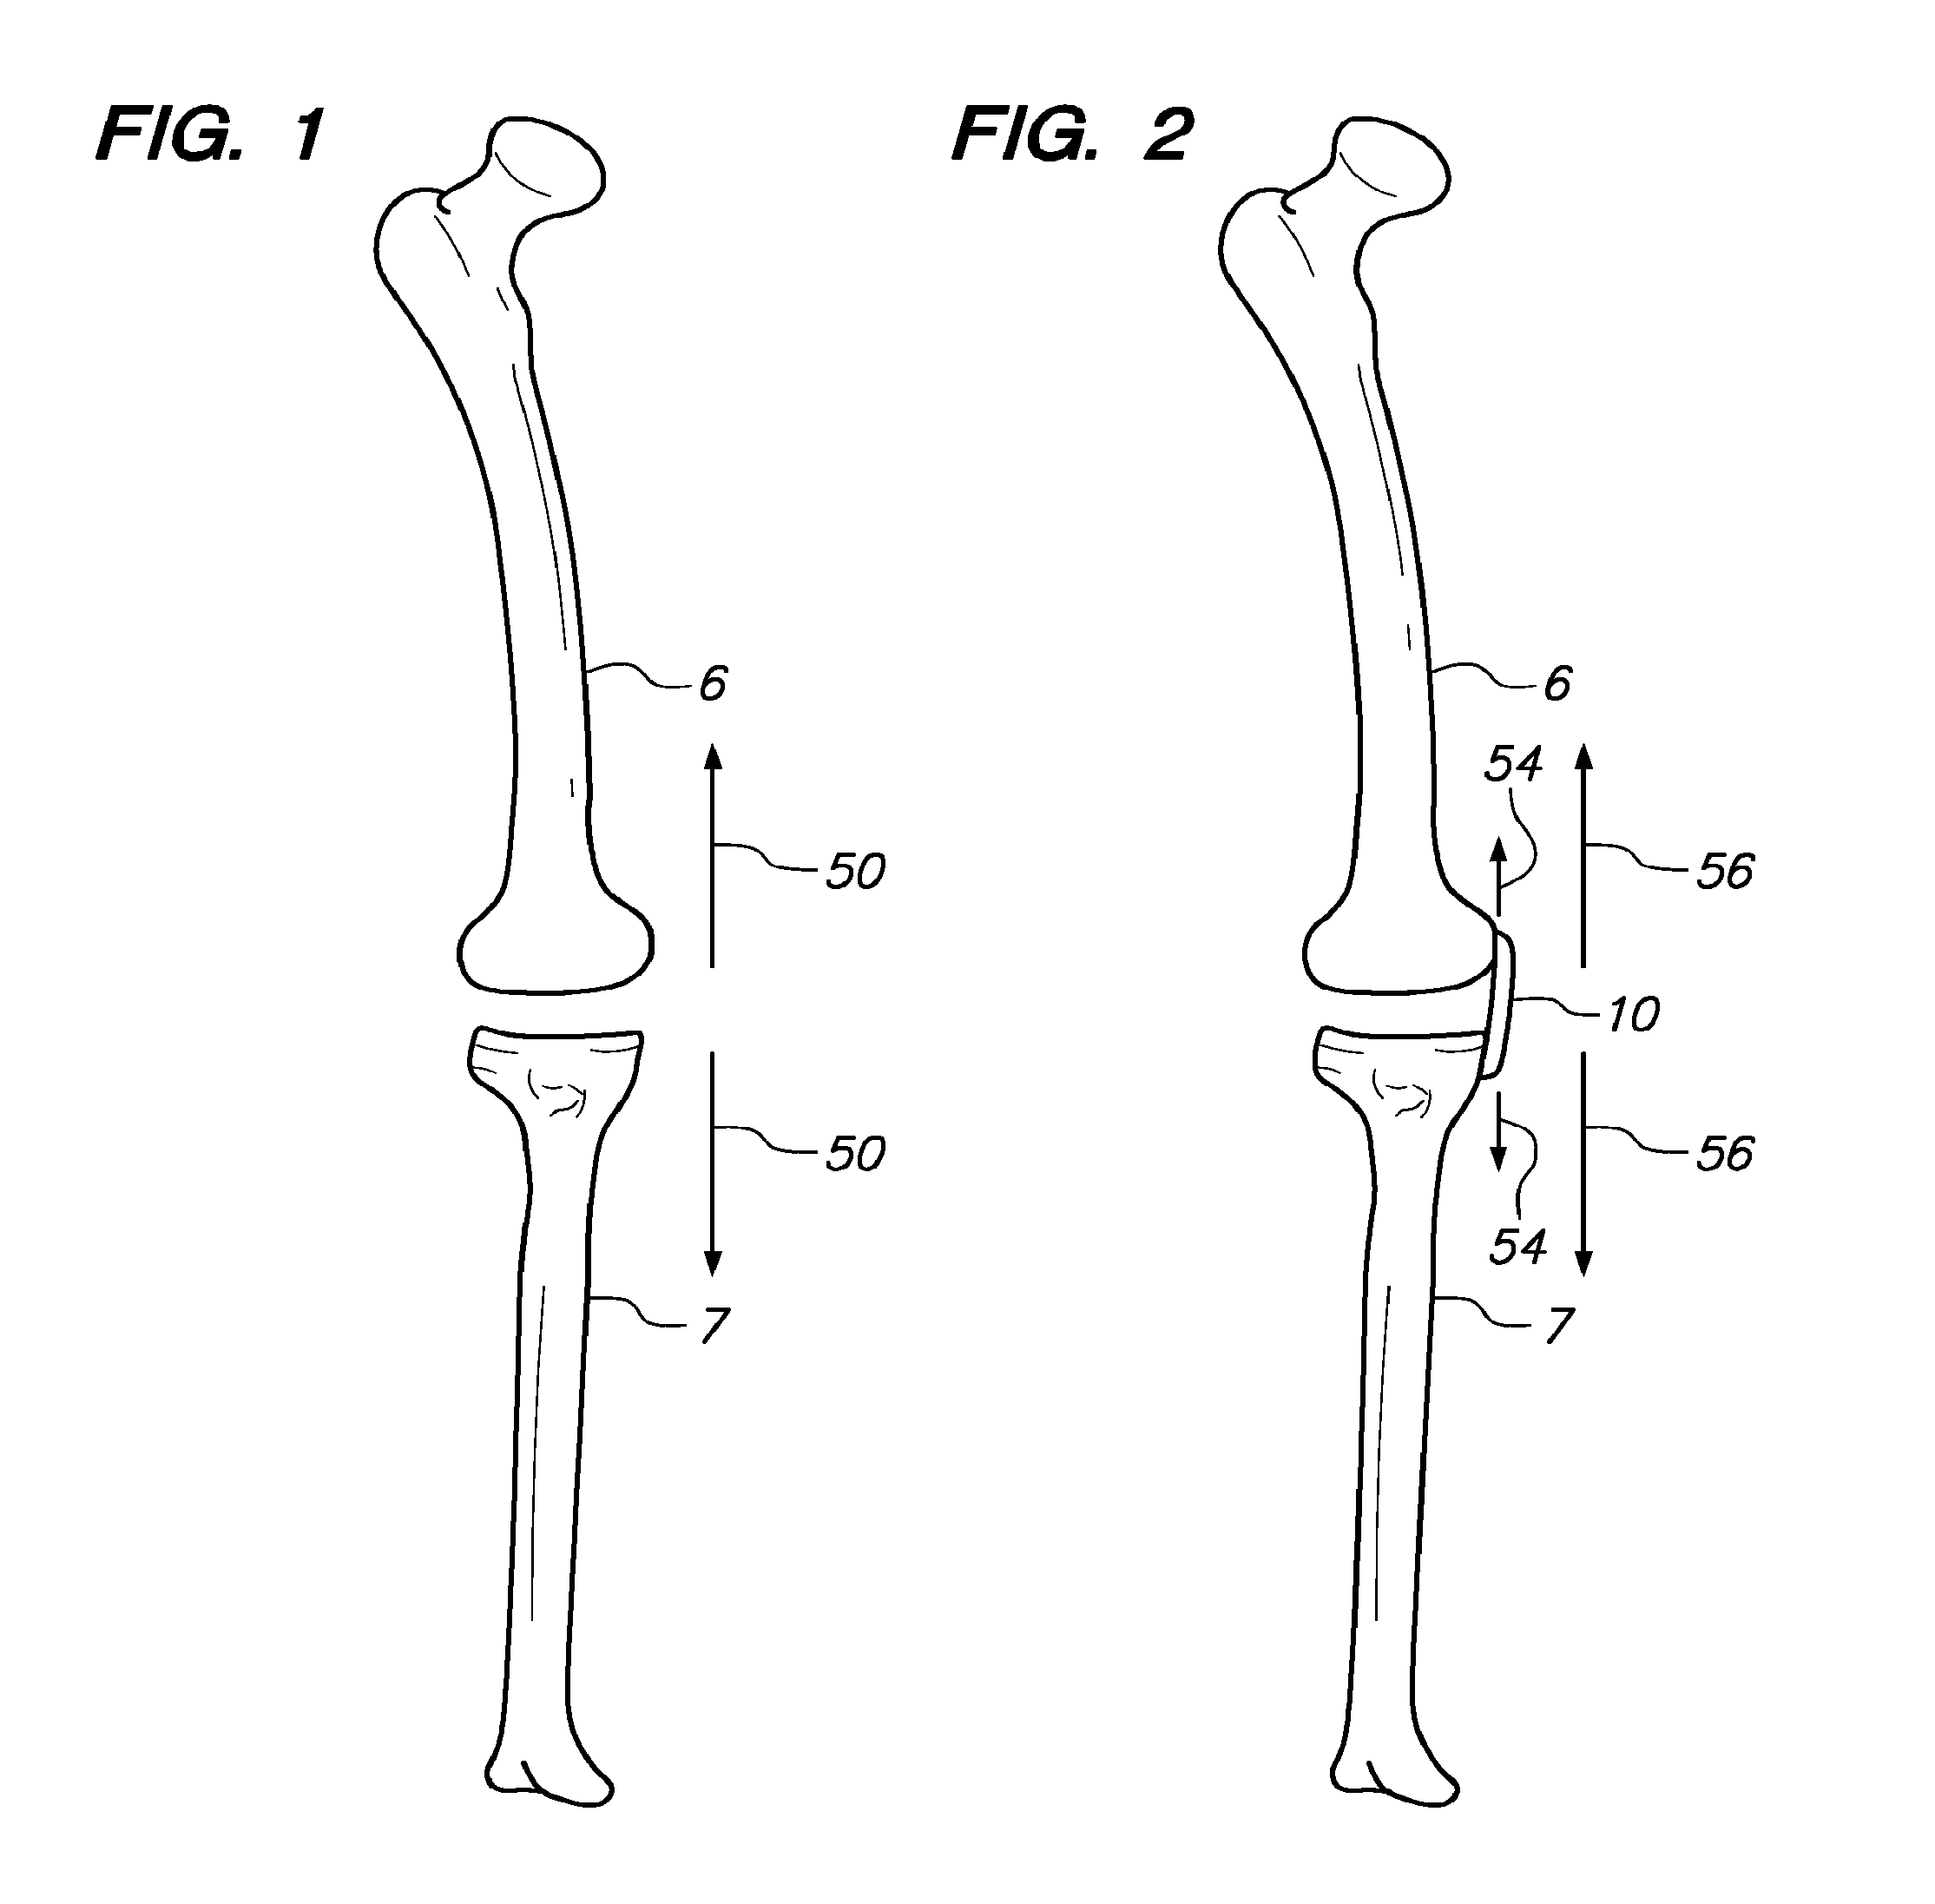 Extra-articular implantable mechanical energy absorbing assemblies having two deflecting members and methods